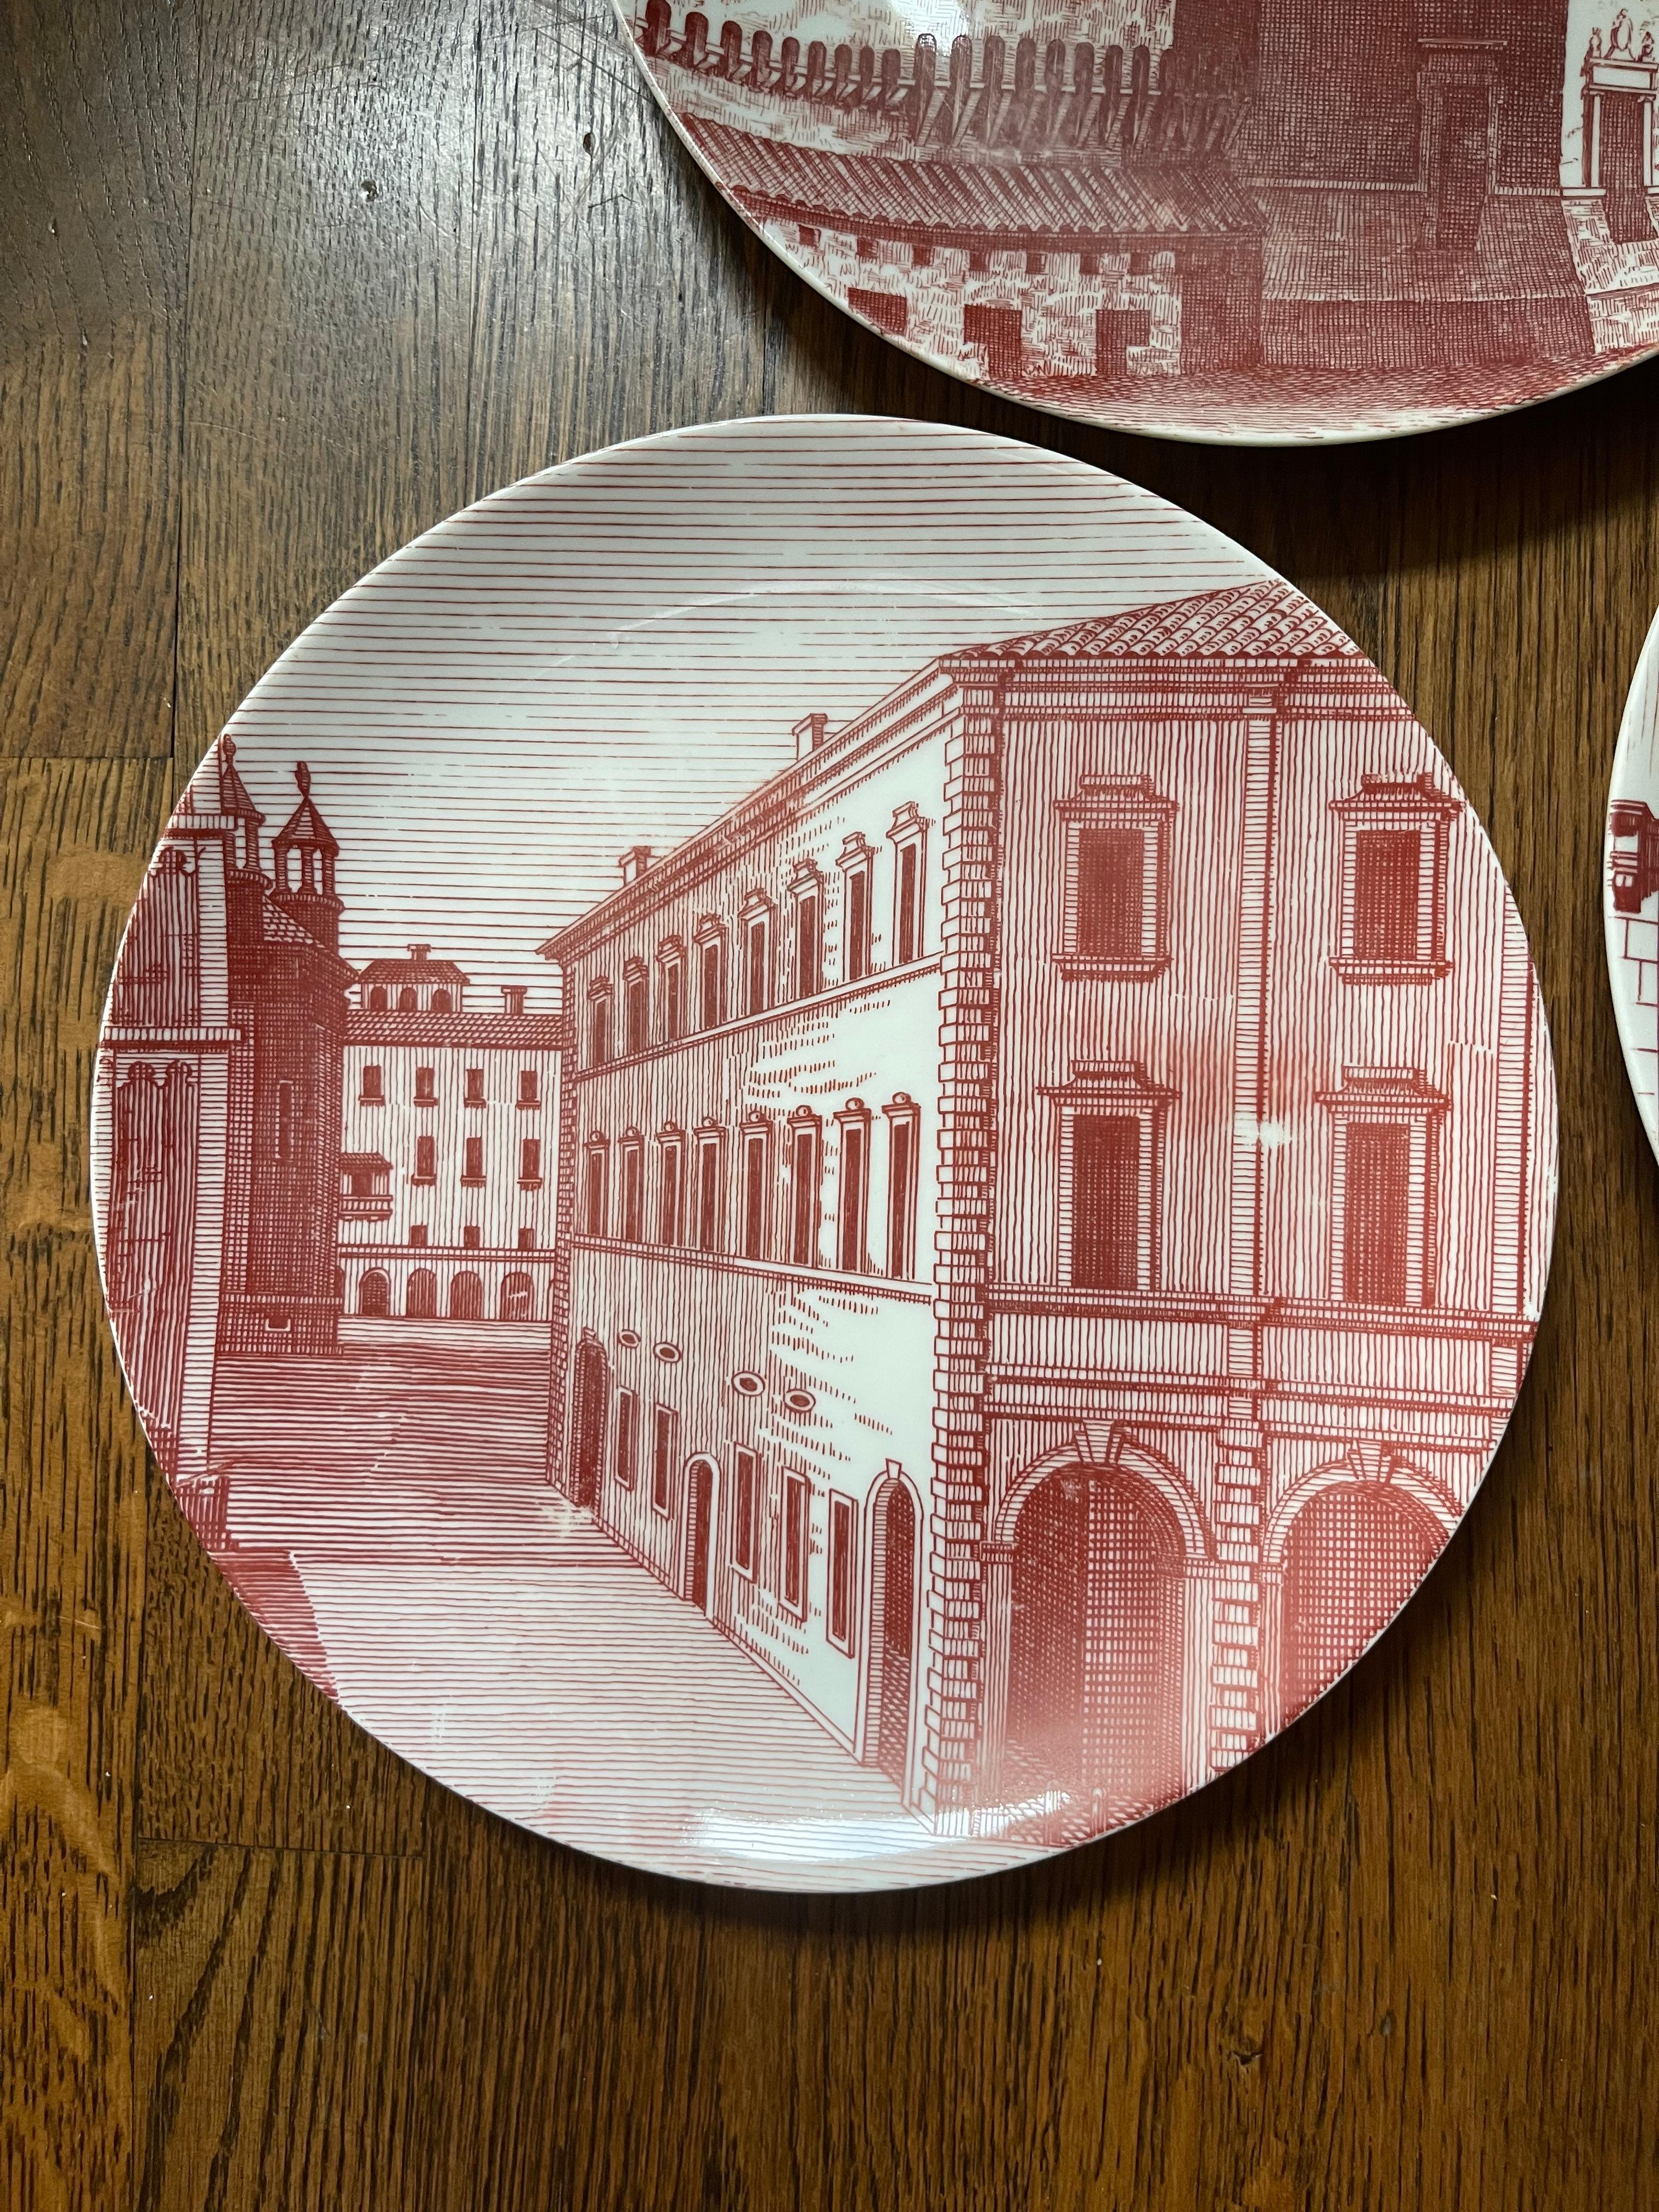 Mid-Century Modern Fornasetti “Prospettiva” Architectural Plates, Set of 3, 1950’s For Sale